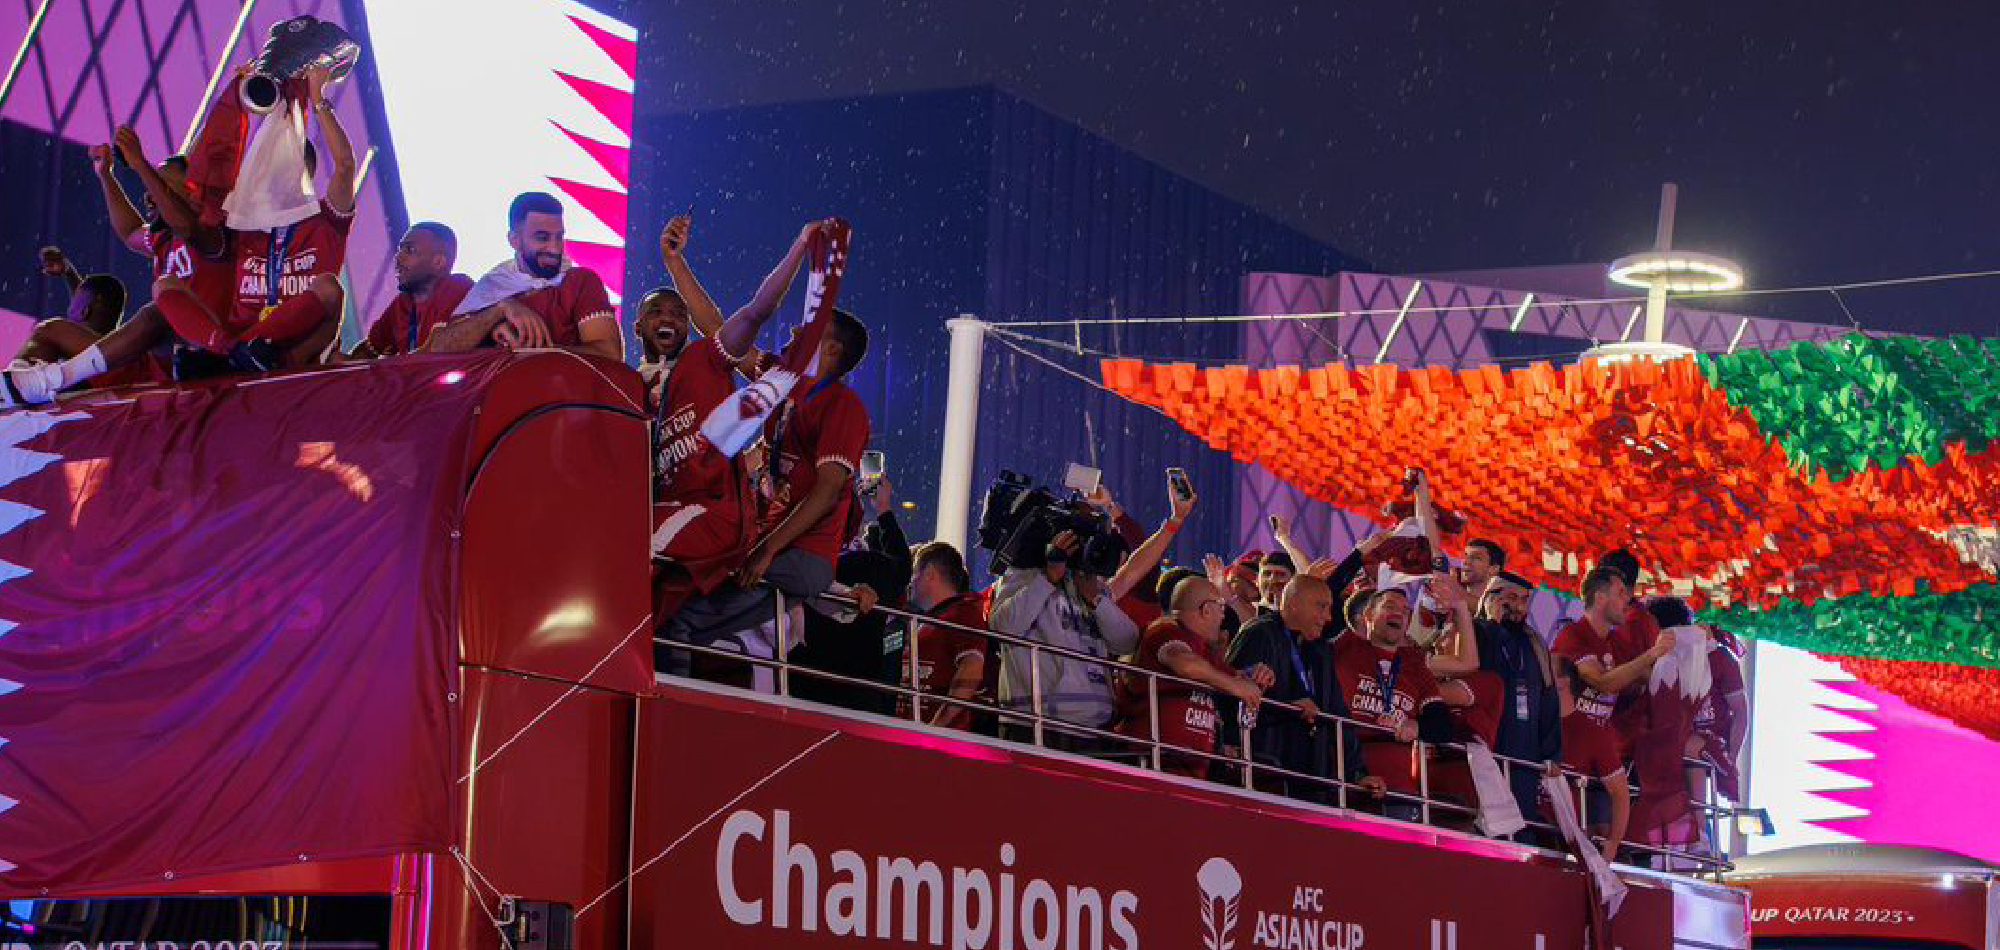 Asian Cup Champions parade in open-bus, fans celebrate at Lusail Boulevard